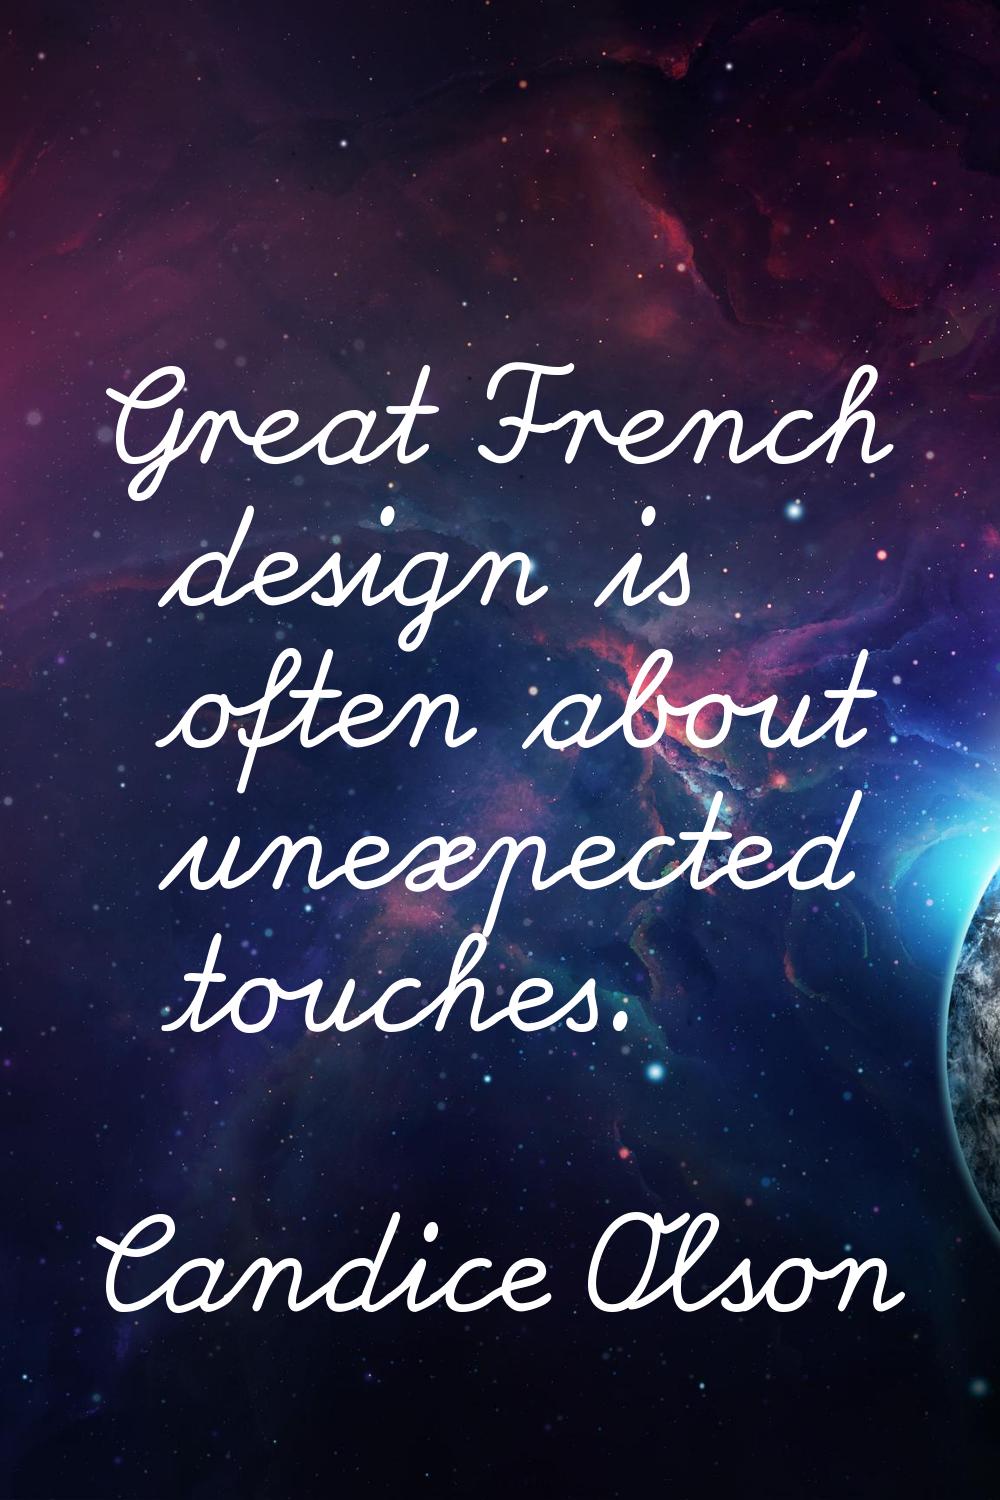 Great French design is often about unexpected touches.